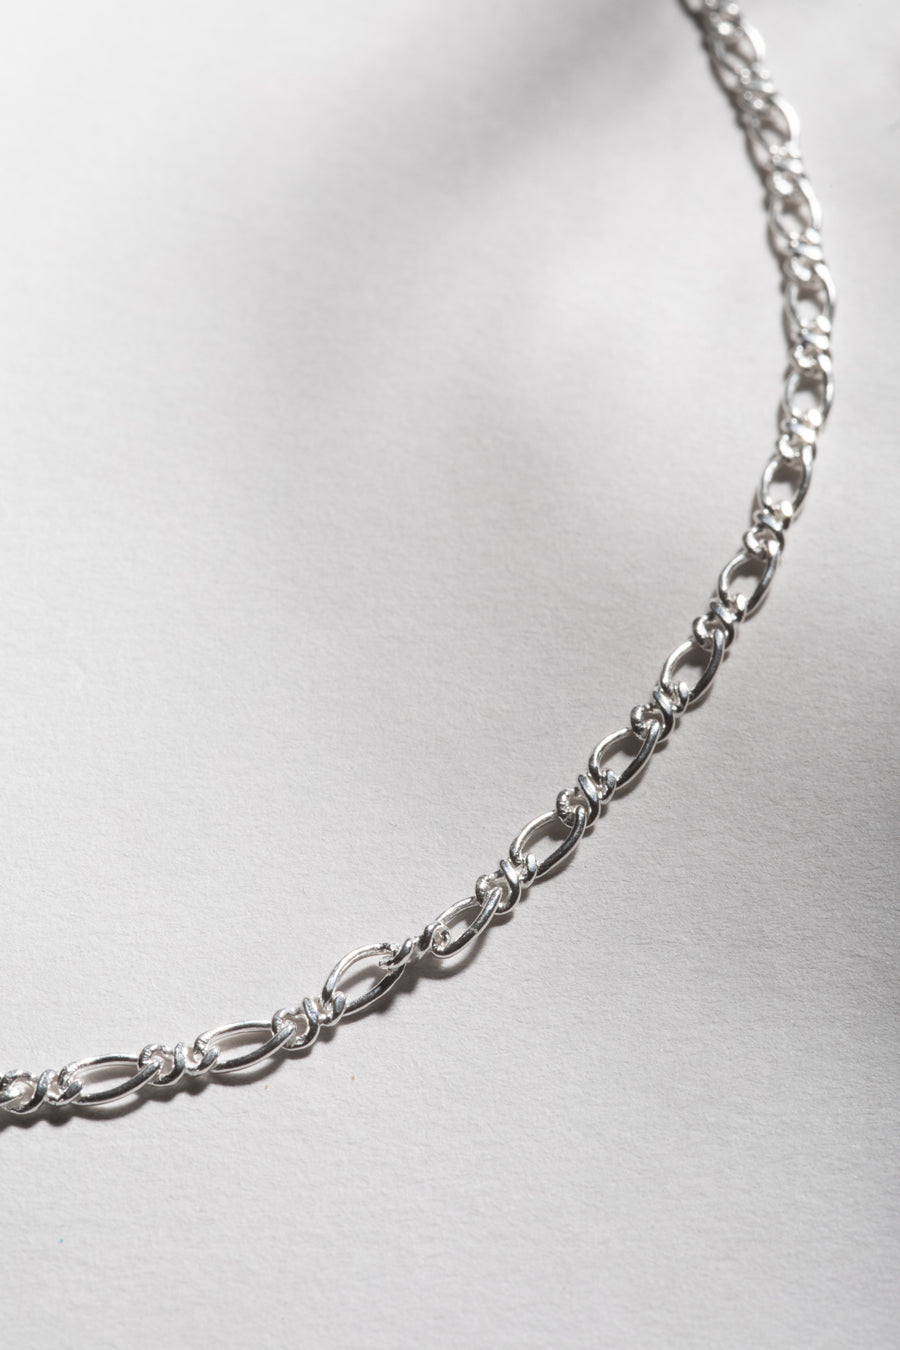 Figaro Chain Sterling Silver Necklace